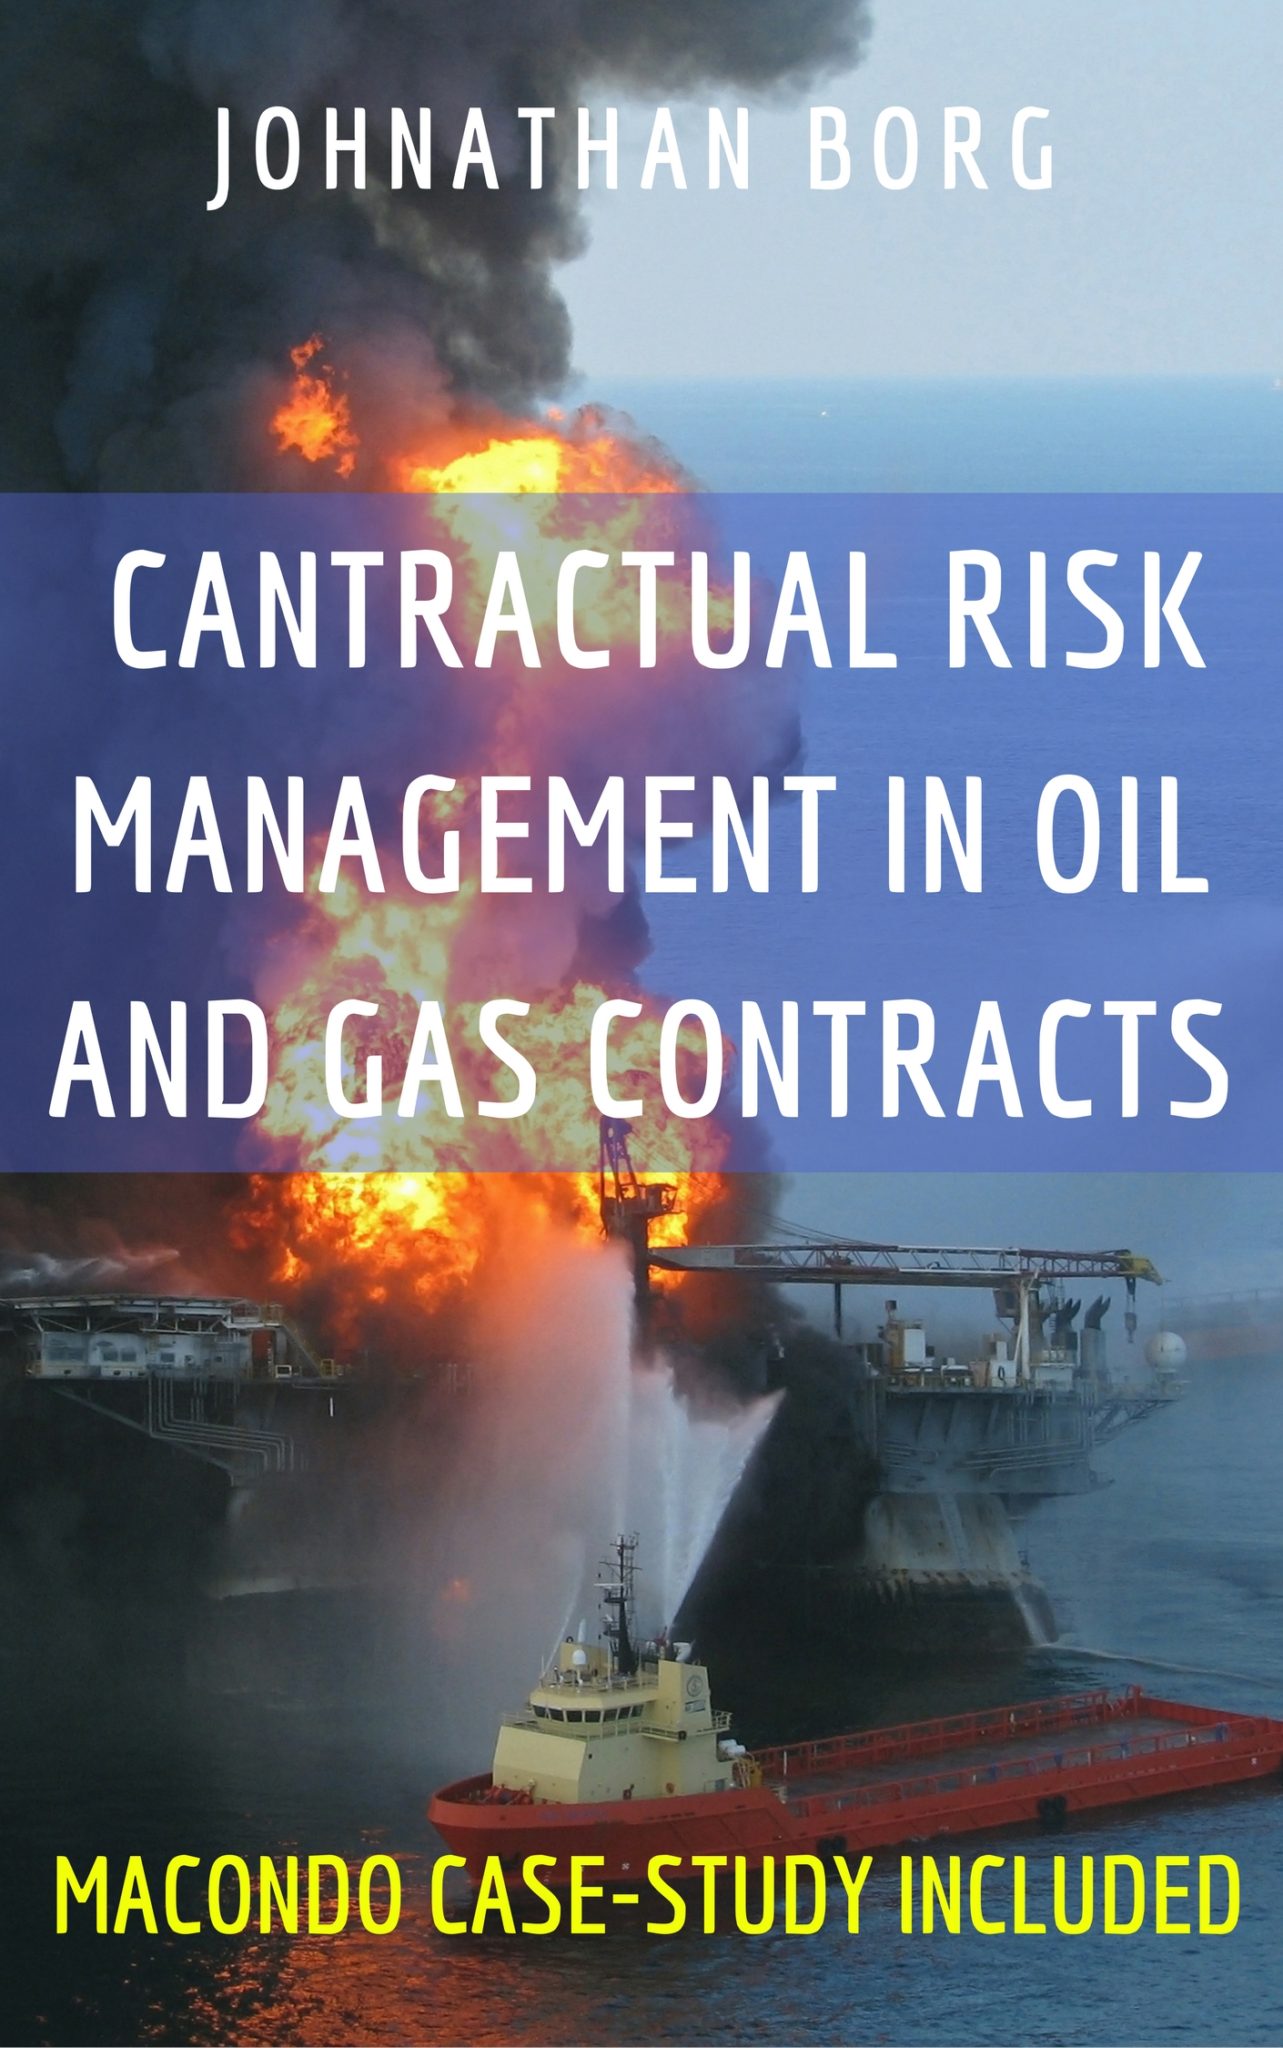 FREE: Contractual Risk Management in Oil and Gas Contracts: Macondo Deepwater Horizon Oil Spill Case Study Included by Johnathan Borg